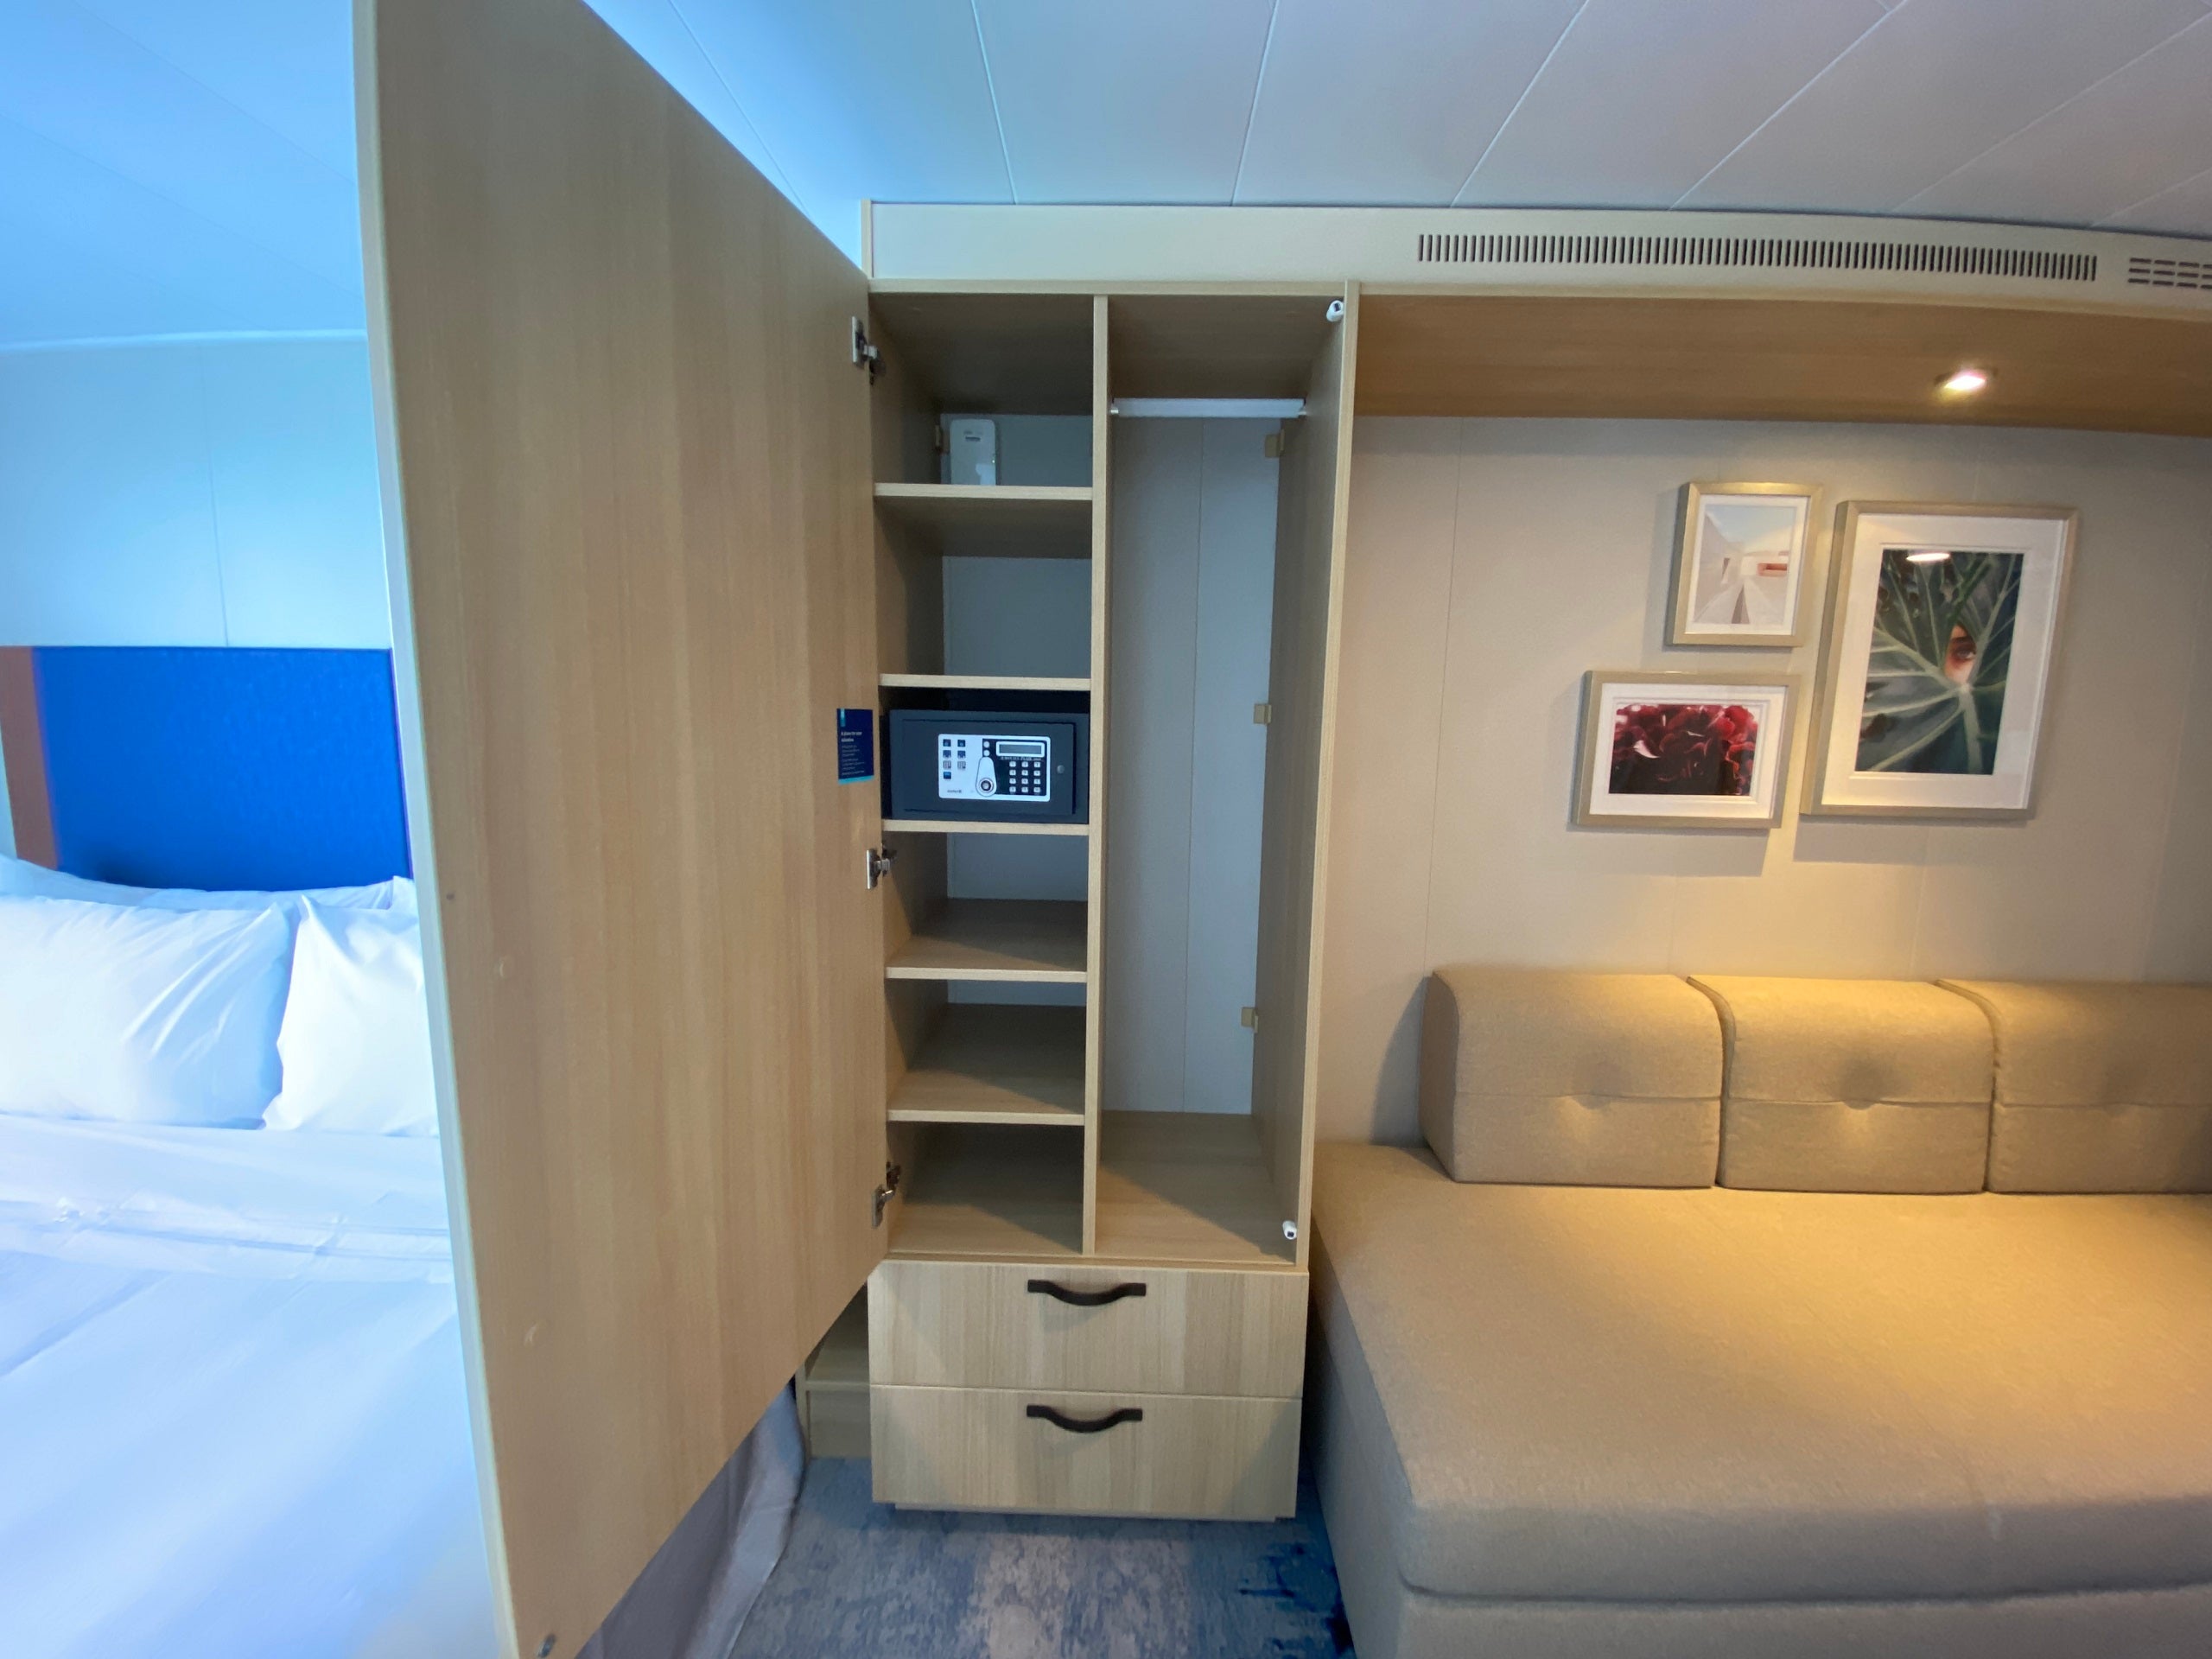 One of two closets in a balcony cabin on Royal Caribbean's Wonder of the Seas.